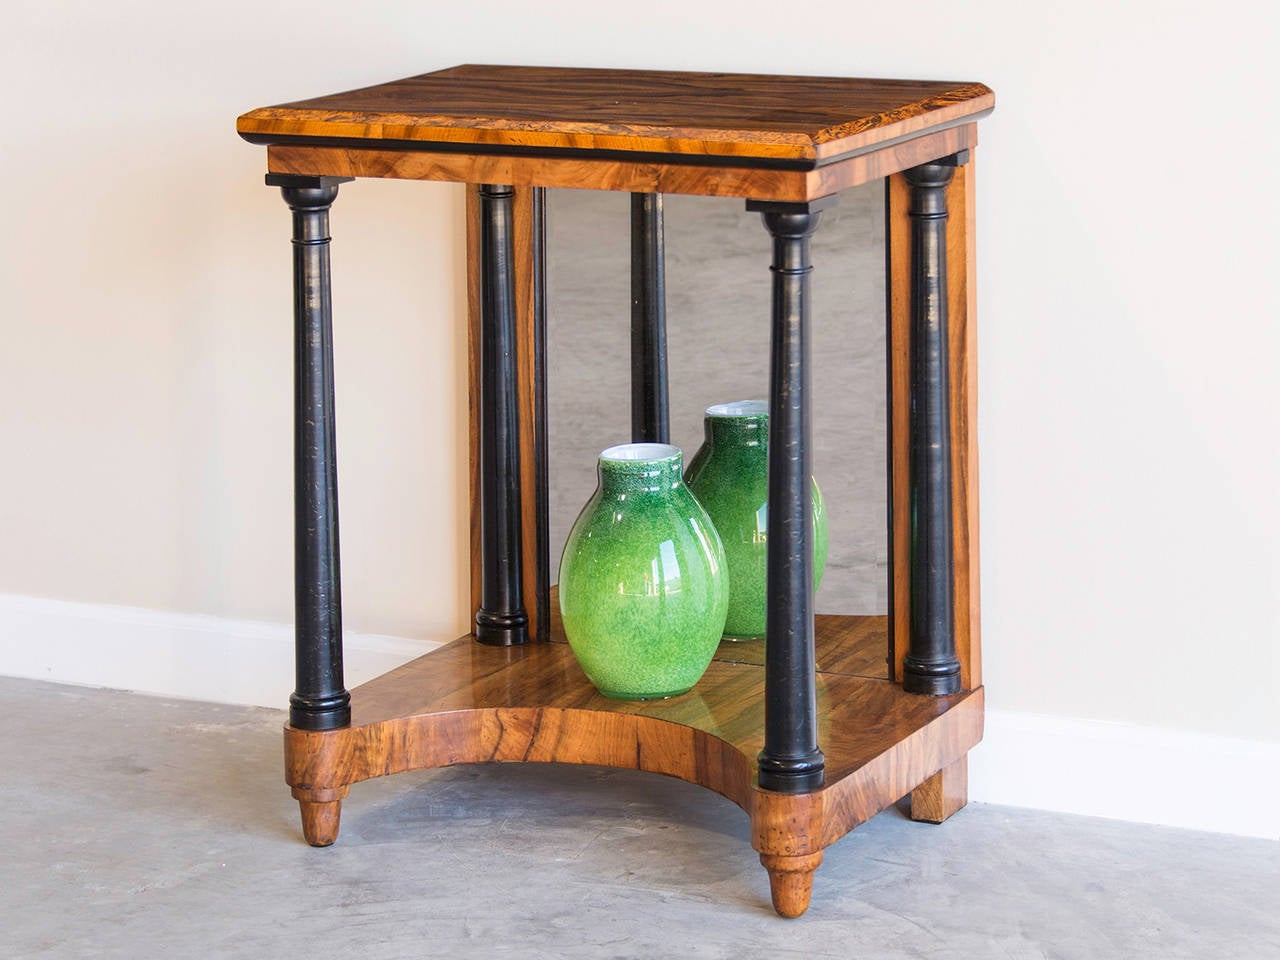 Receive our new selections direct from 1stdibs by email each week. Please click Follow Dealer below and see them first!

Antique Austrian Biedermeier period walnut console table circa 1825 with a mirrored back. The combination of dramatically